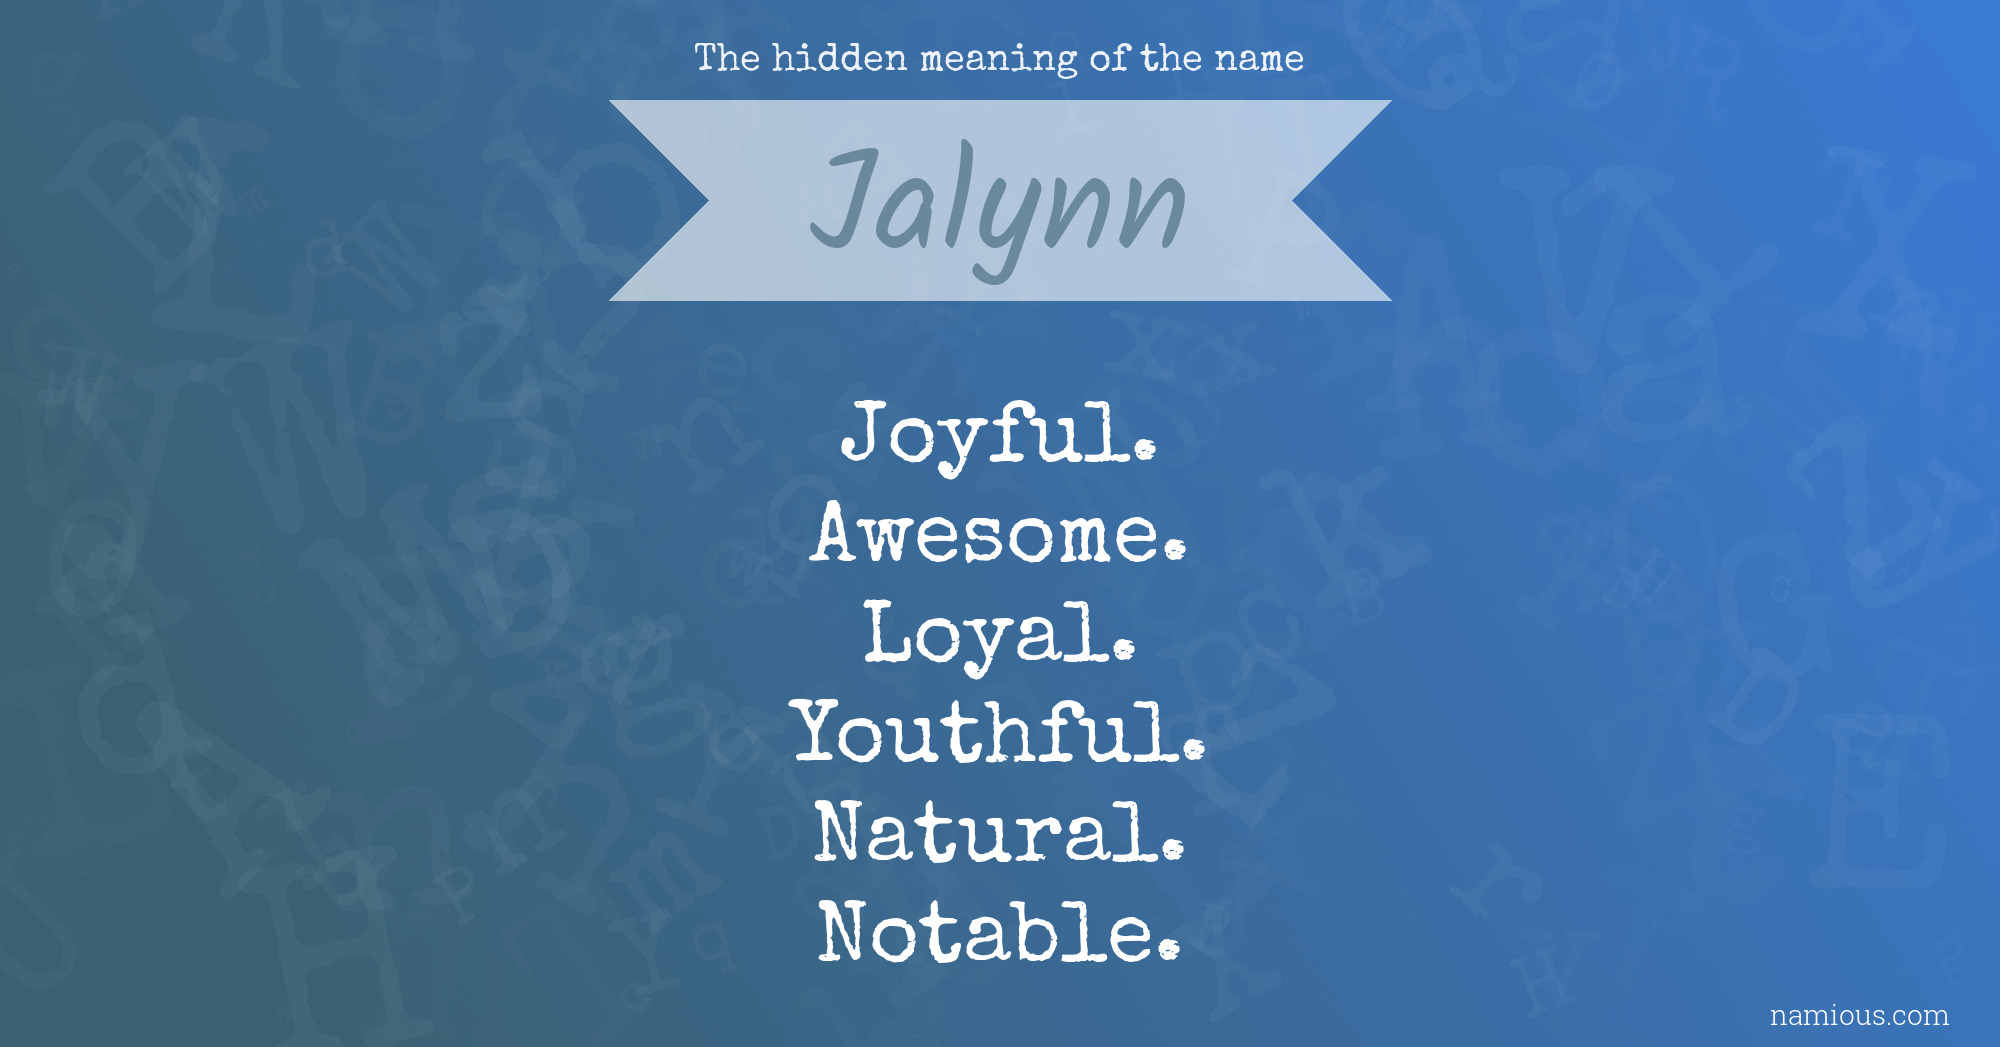 The hidden meaning of the name Jalynn